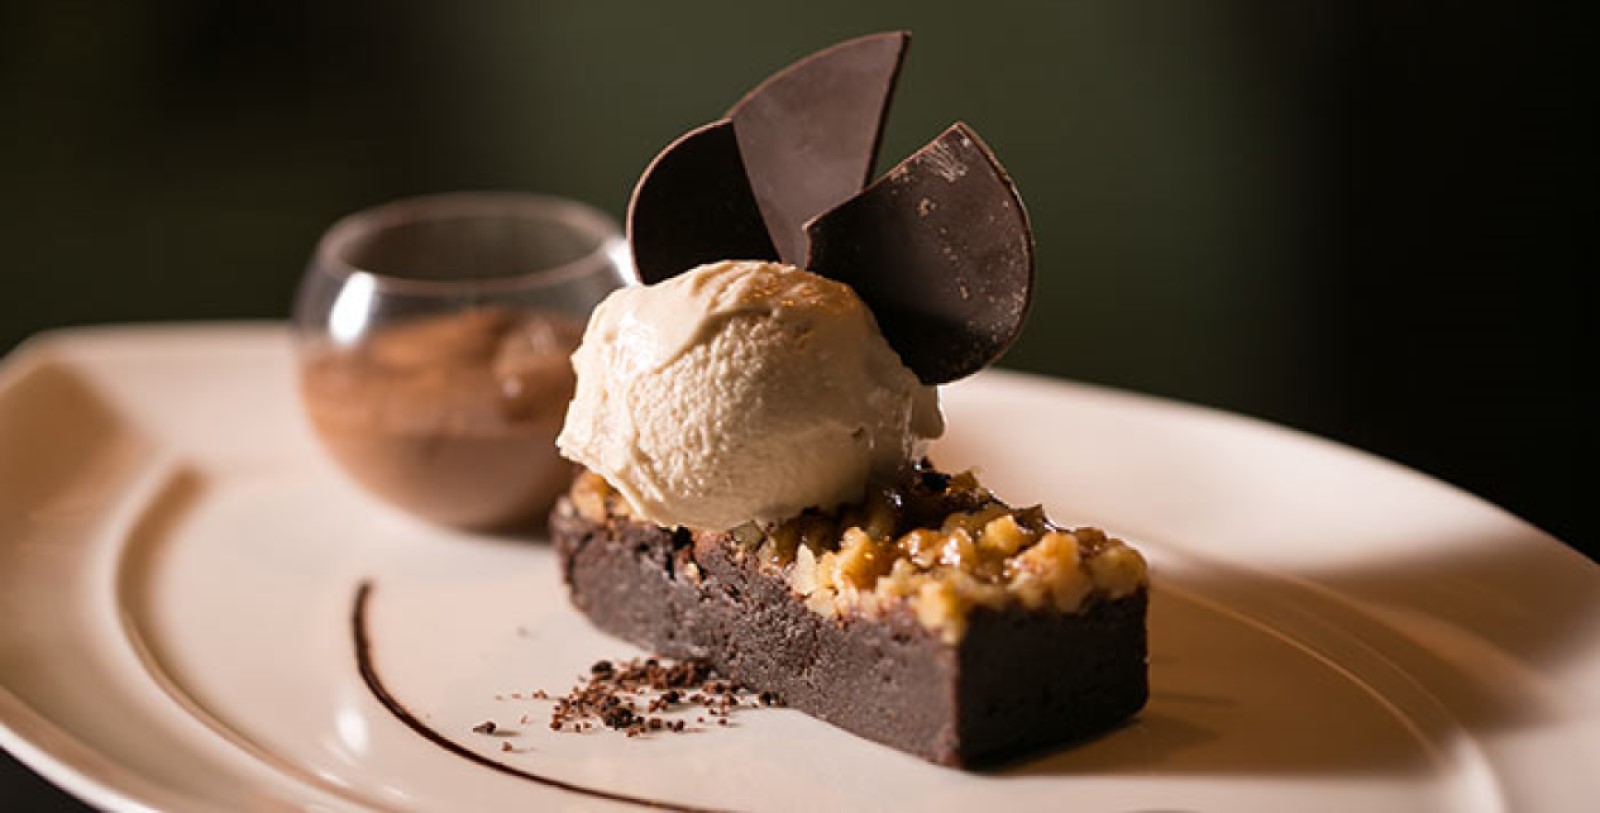 Image of The Palmer House Brownie, The Palmer House, A Hilton Hotel, Member of Historic Hotels of America, in Chicago, Illinois